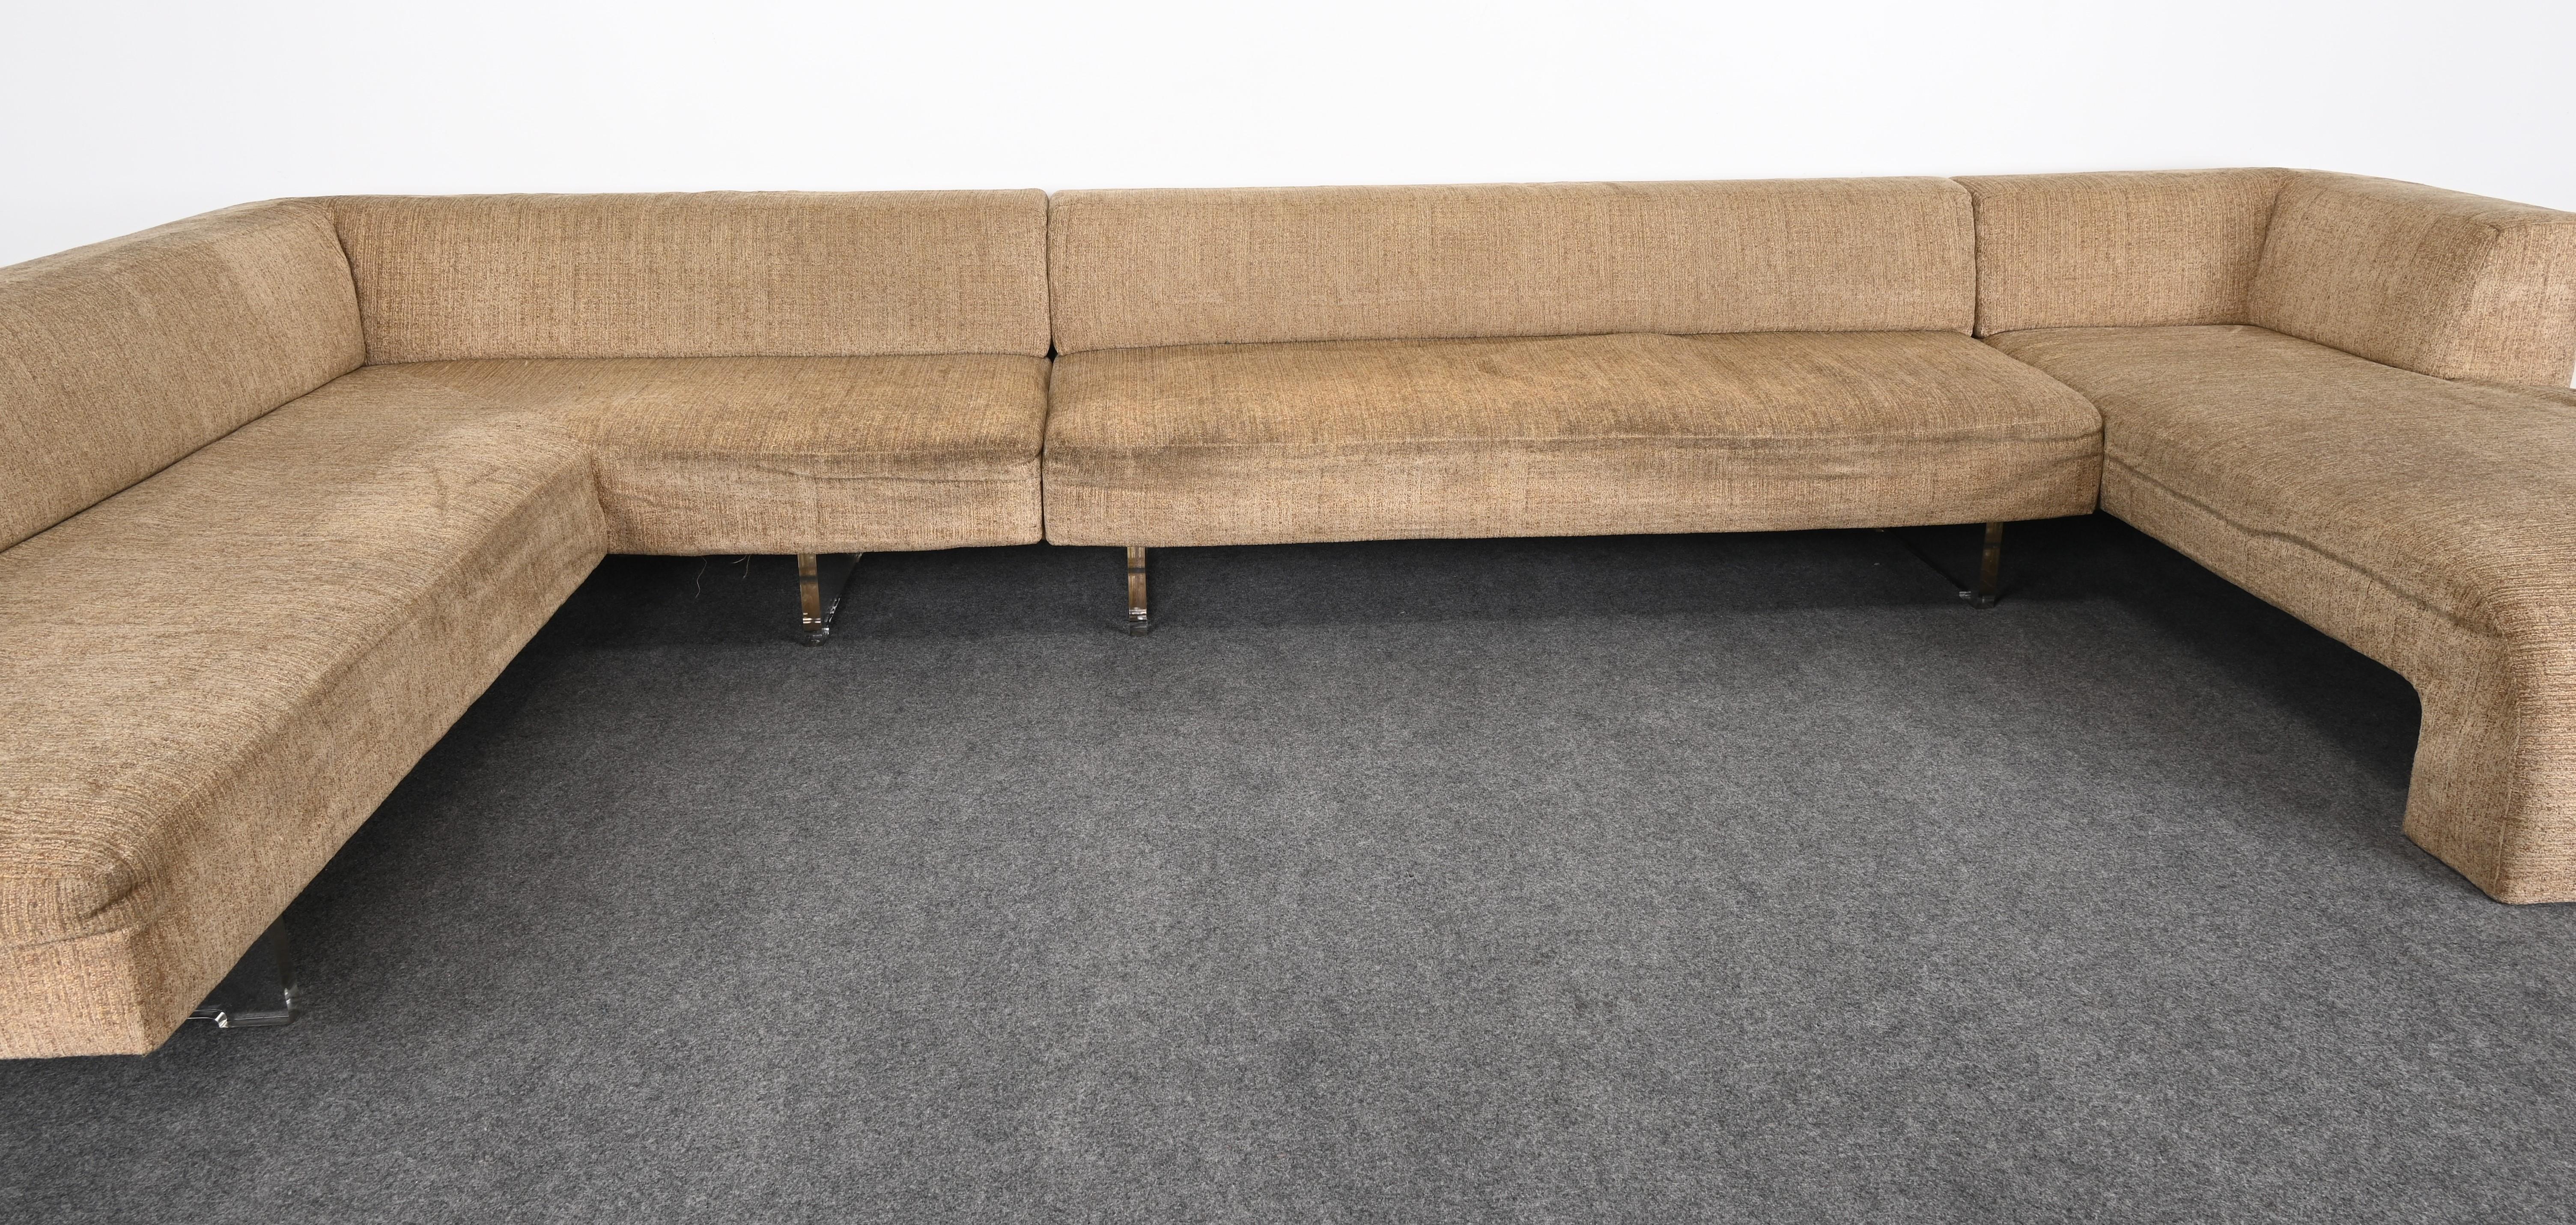 Monumental Sectional Sofa Designed by Vladimir Kagan, 1970s For Sale 3